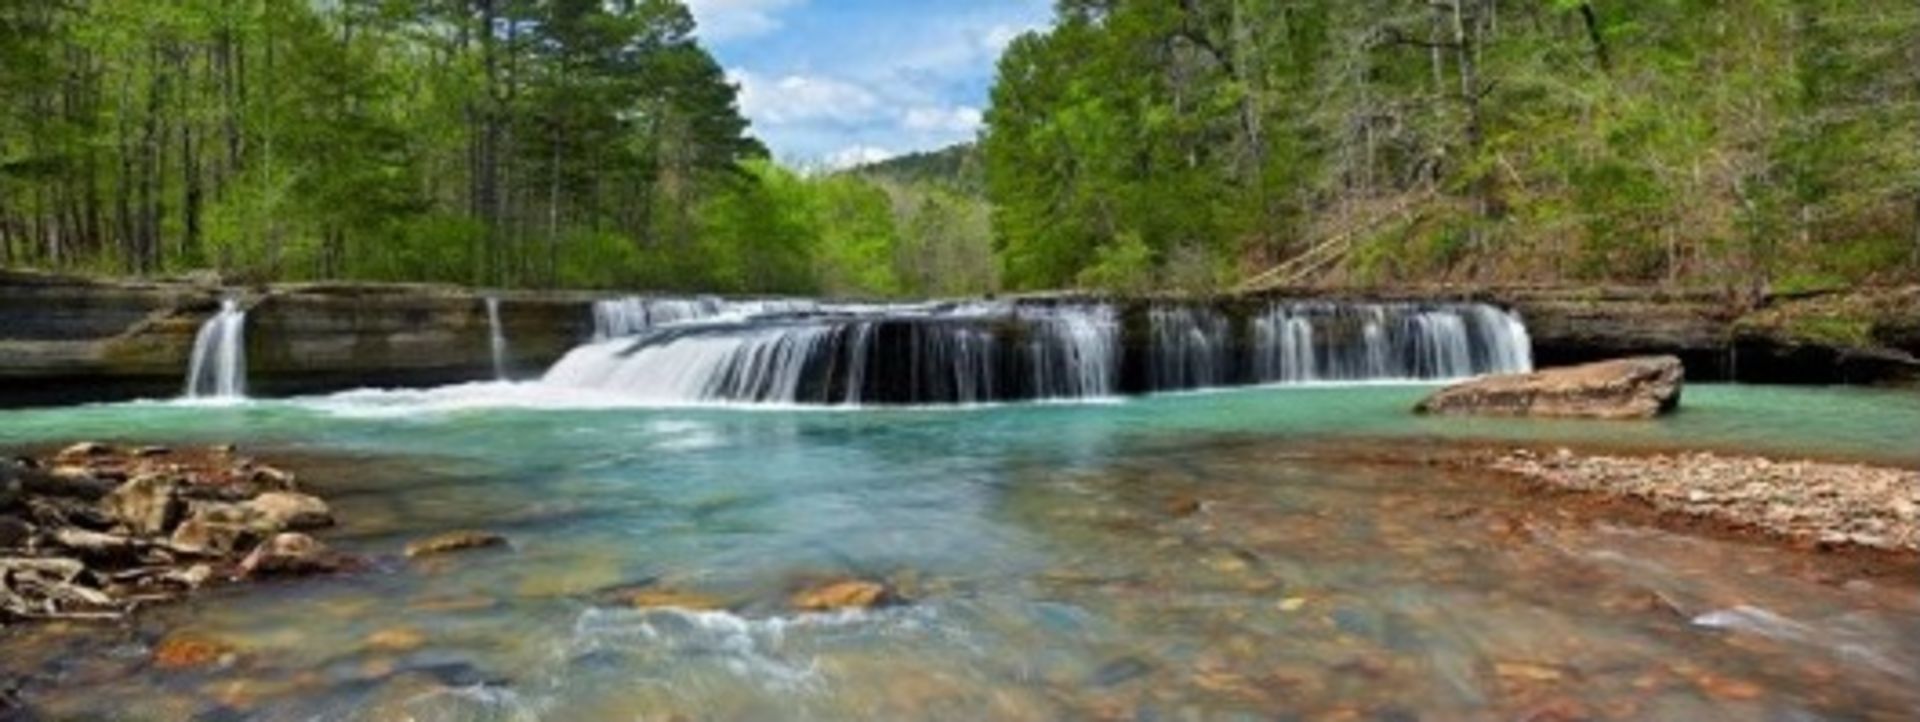 DIAMOND CITY - THE PARADISE IN ARKANSAS!!! YOU ARE BUYING 2 PLOTS OF LAND - LOT 361 AND 362 - Image 6 of 6